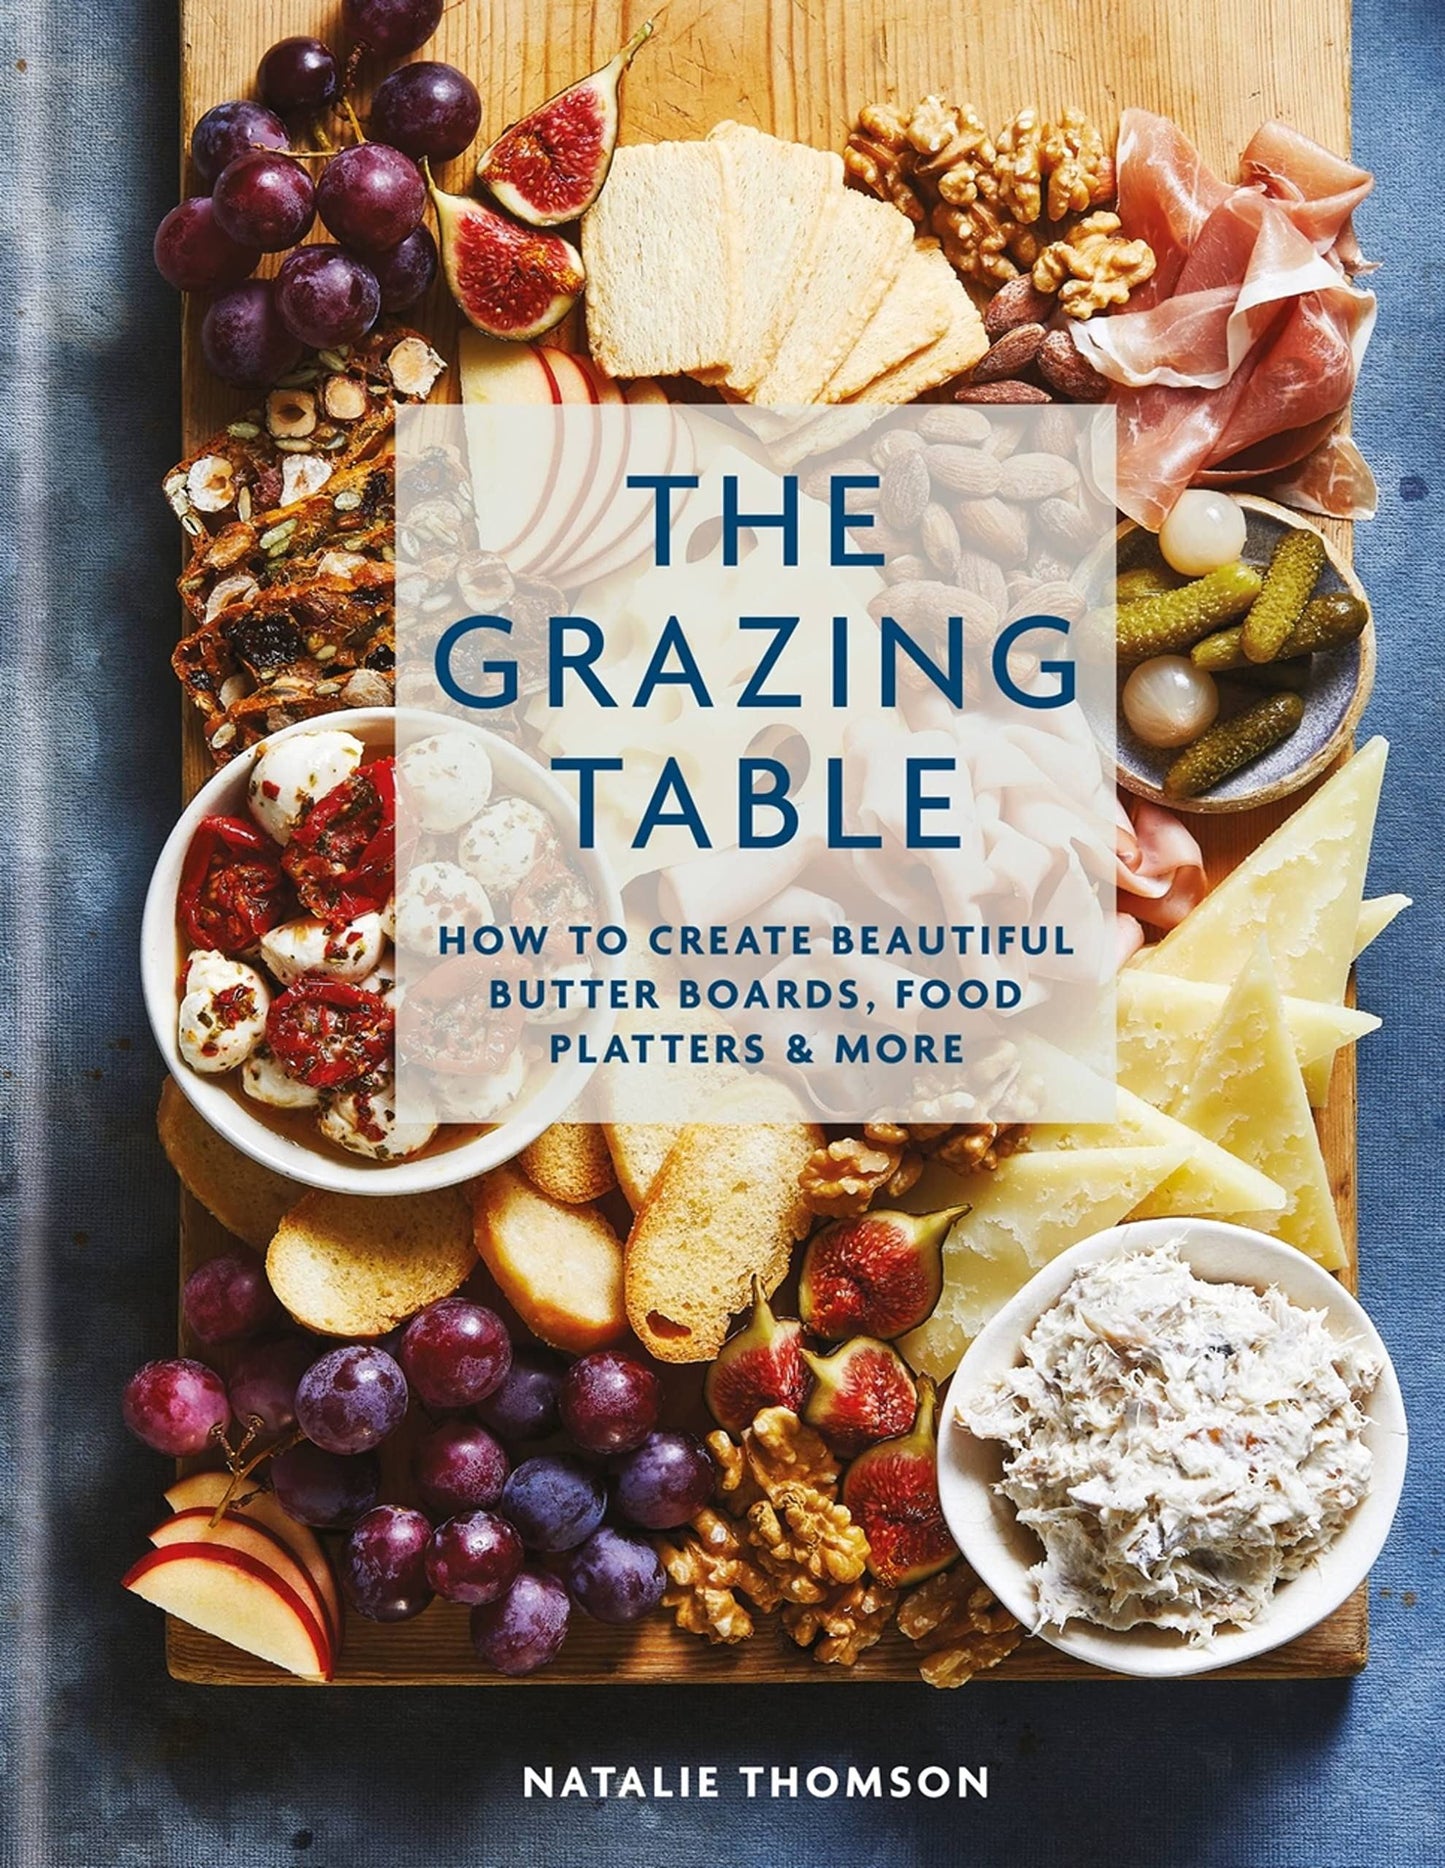 GRAZING TABLE (BUTTER BOARDS FOOD PLATTERS AND MORE